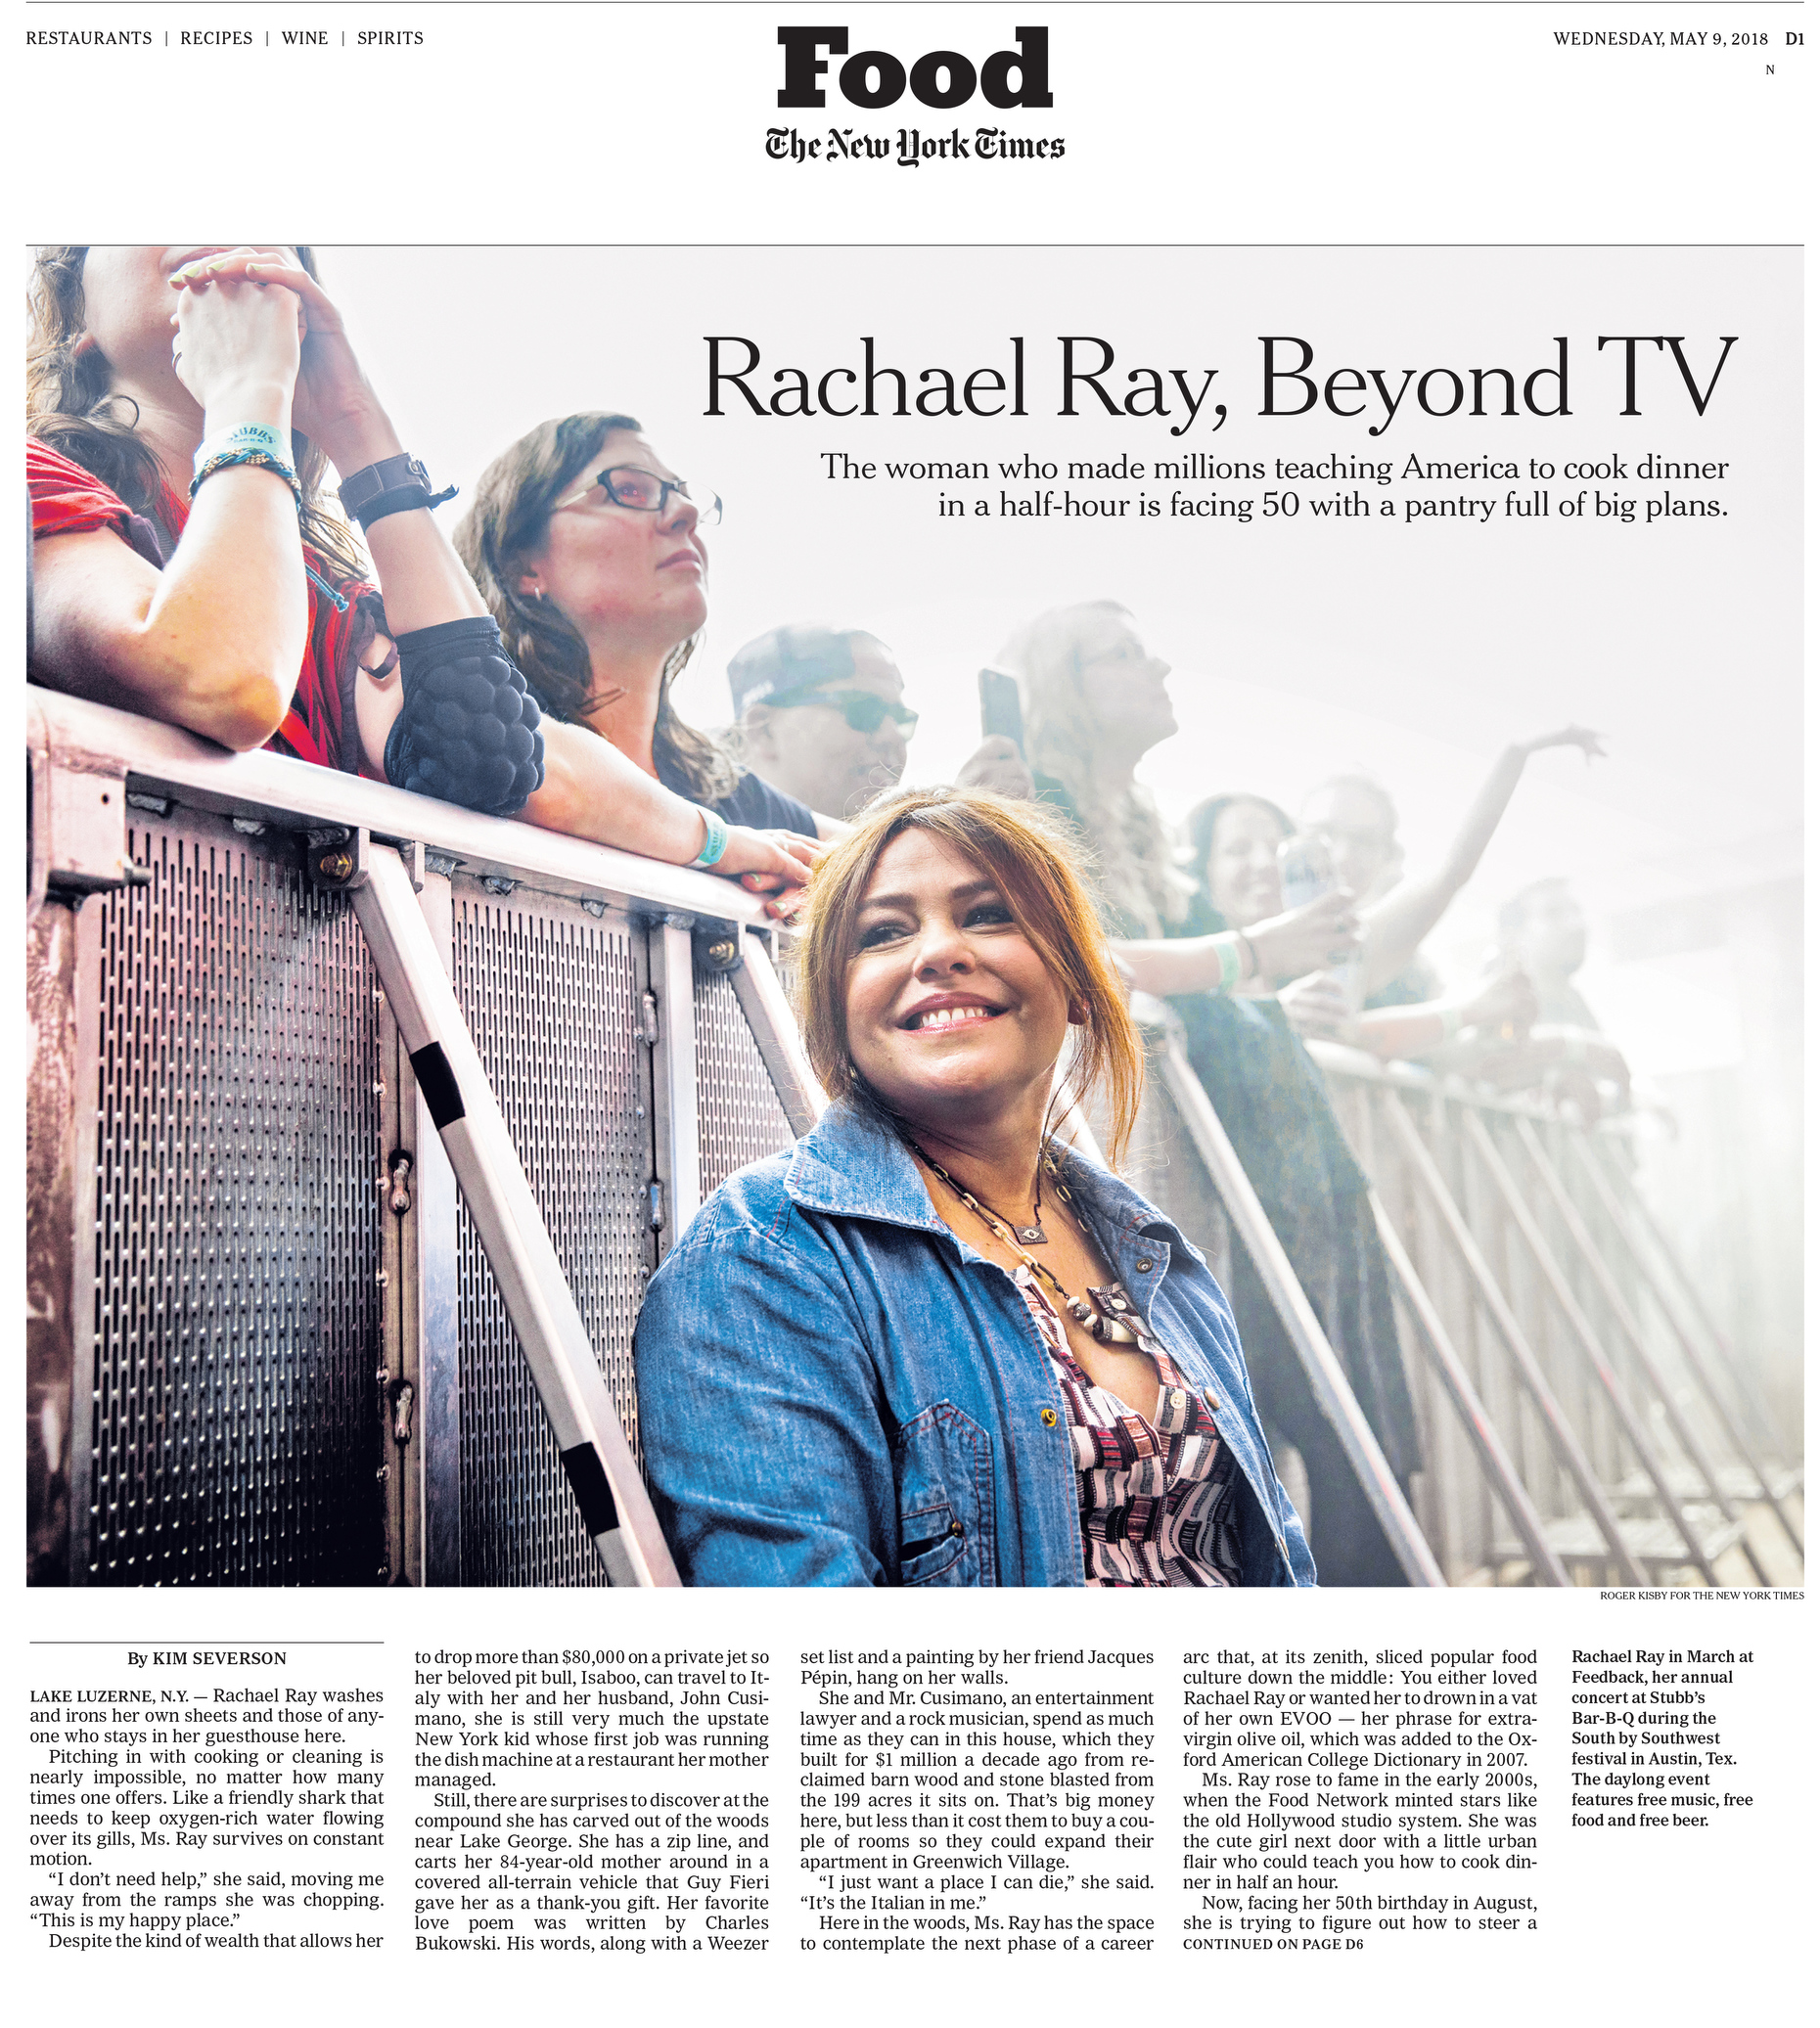  Rachael Ray for NYT 